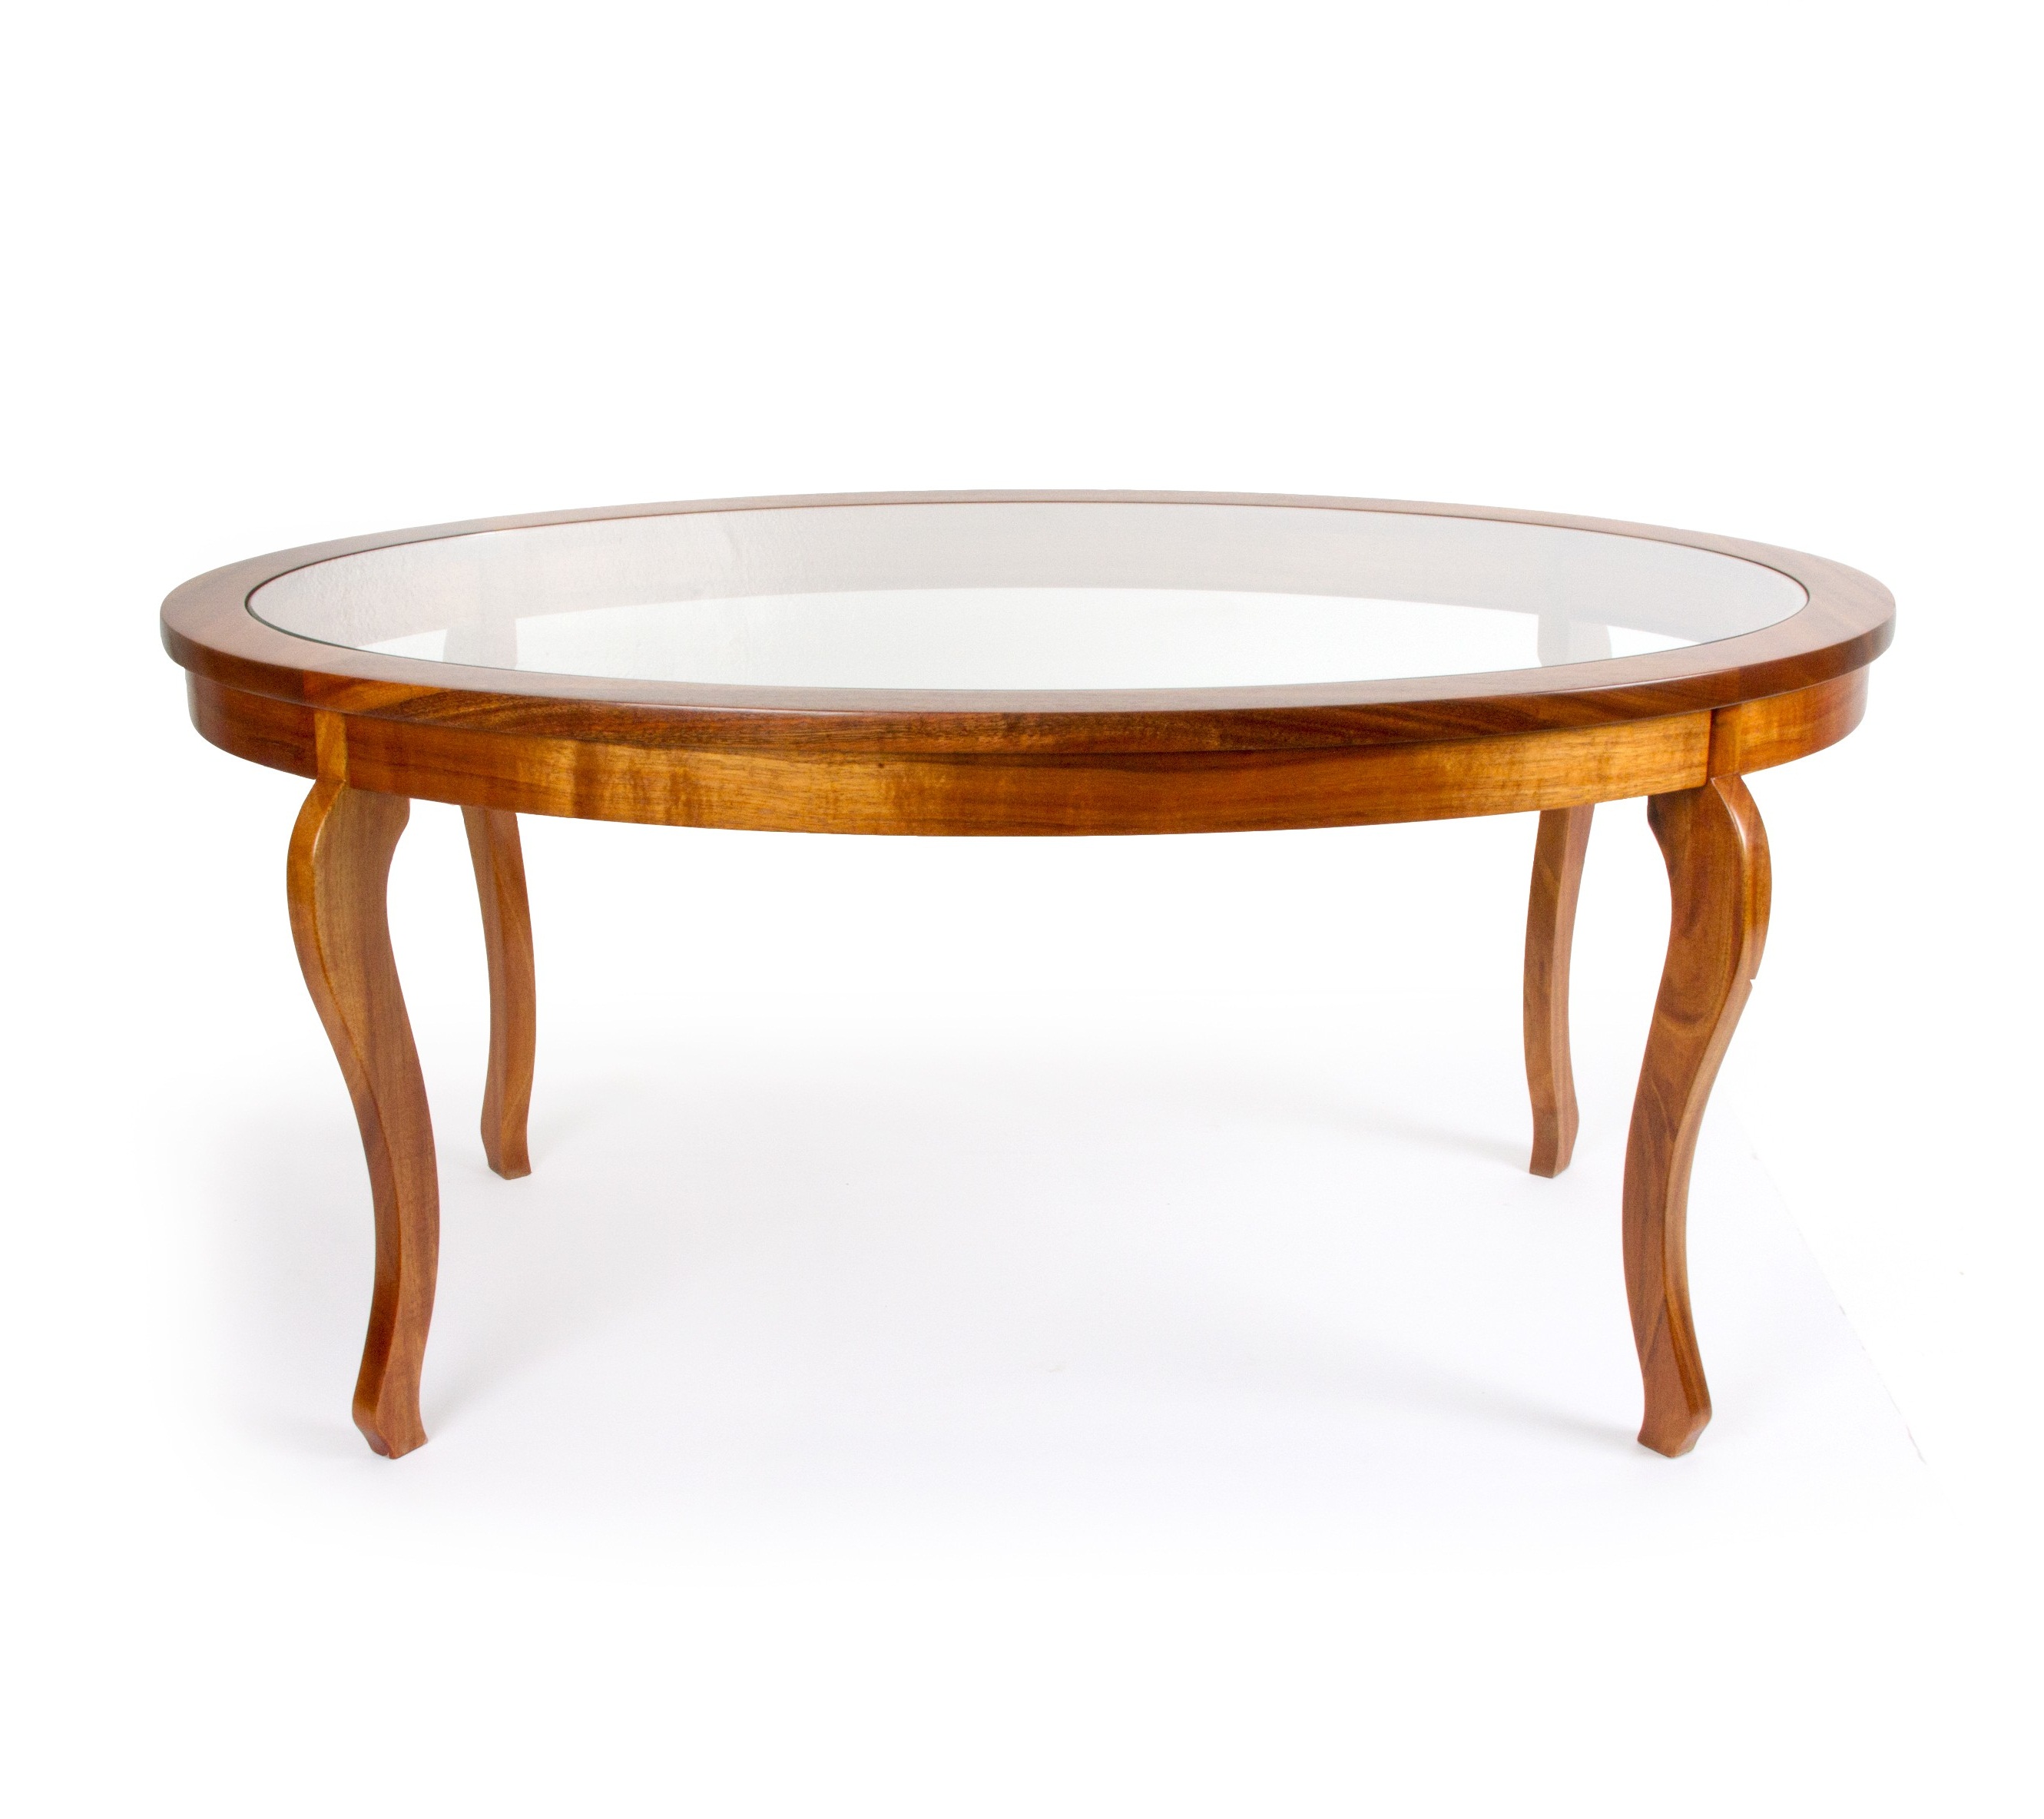 marvelous glass coffee table top replacement another consideration when comes appropriate oval shaped its additional feature for end wall clocks homesense inch entry with shelf